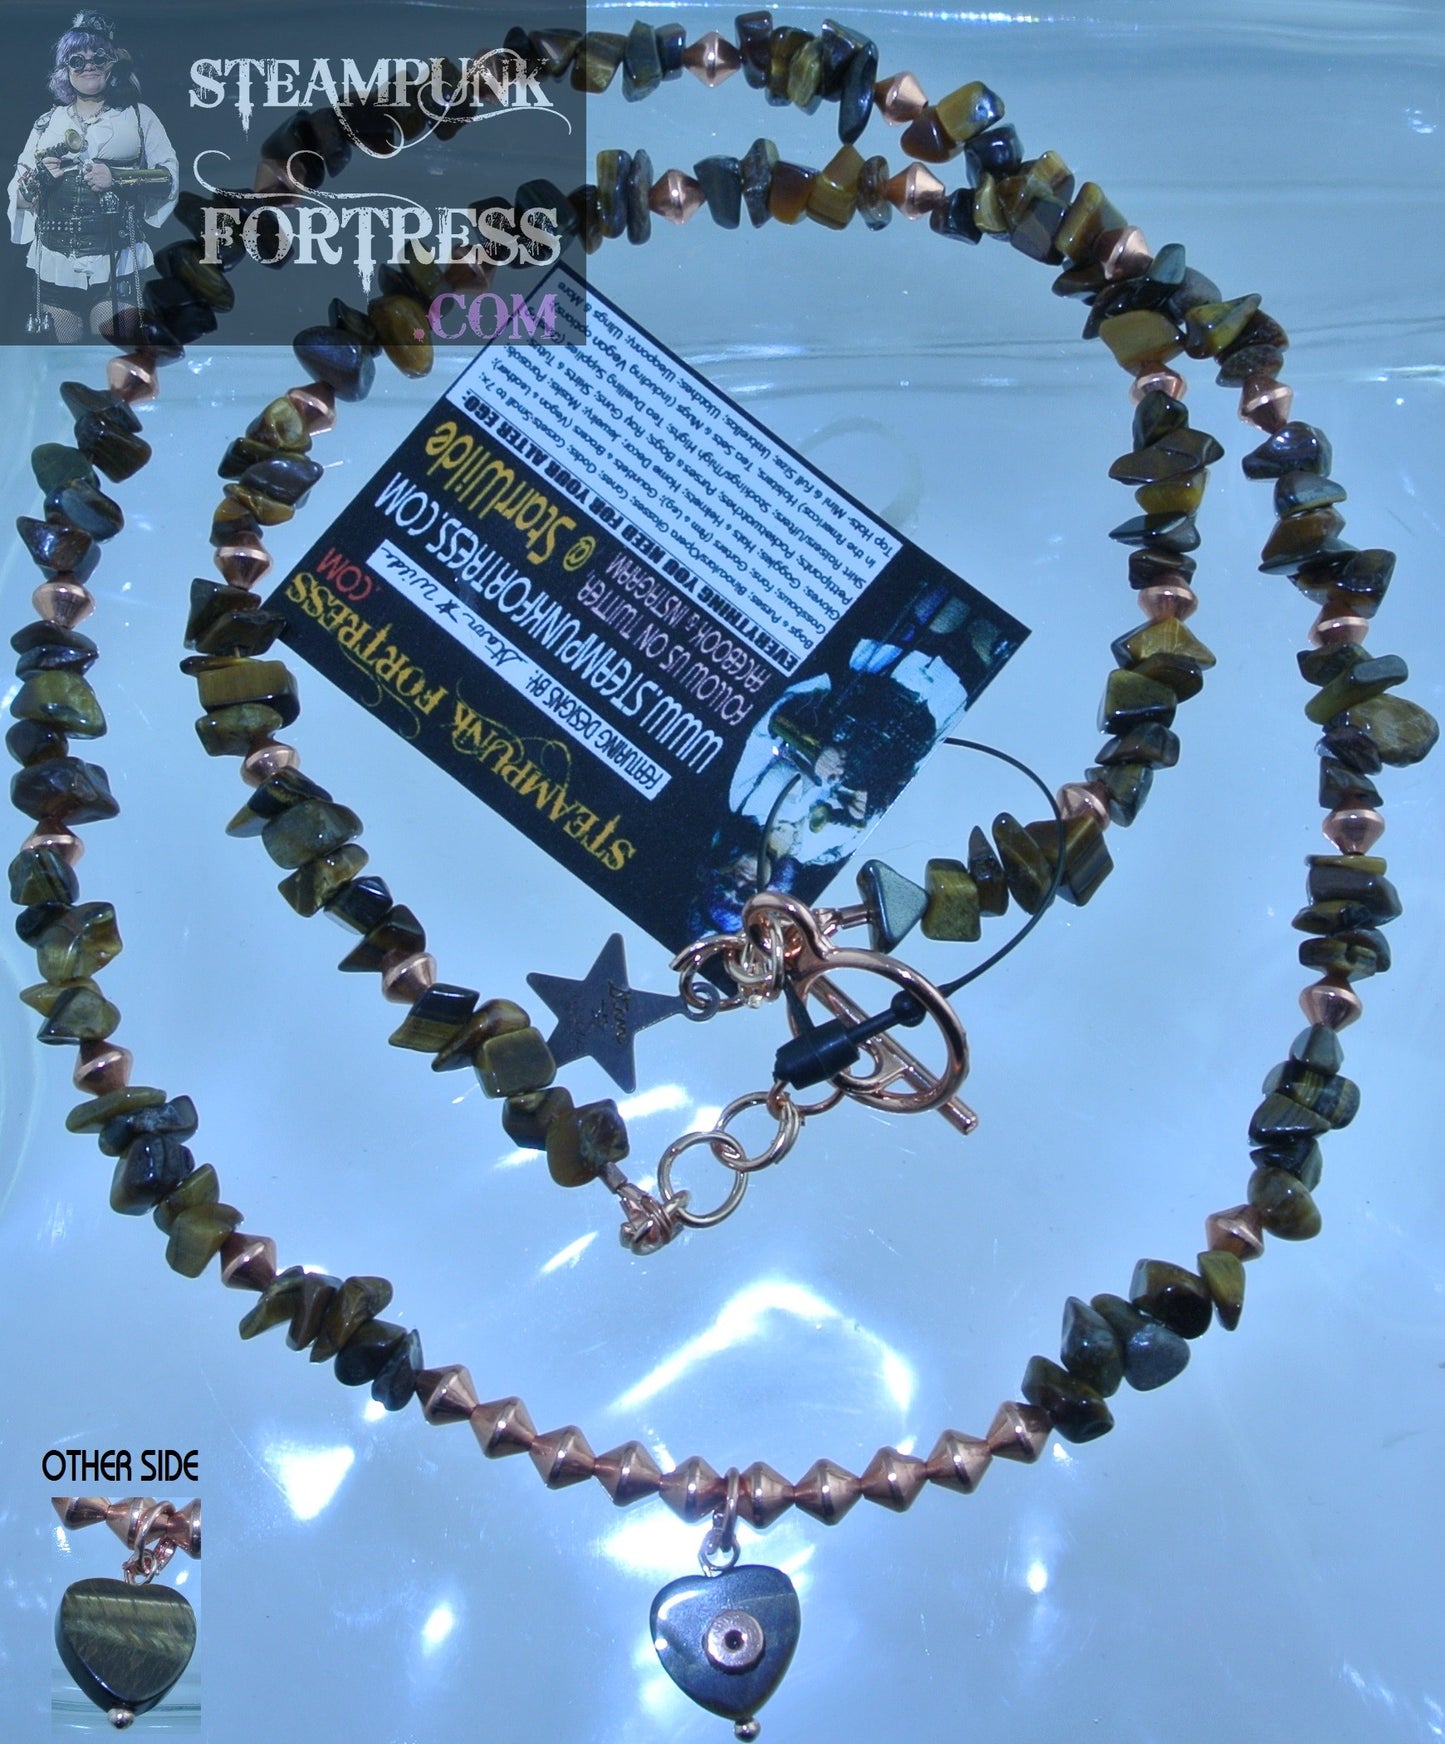 COPPER BRIGHT TIGERS EYE GEMSTONES STONES CHIPS HEART COPPER GEAR COPPER BEADS NECKLACE SET AVAILABLE STARR WILDE STEAMPUNK FORTRESS 2 SIDED REVERSIBLE